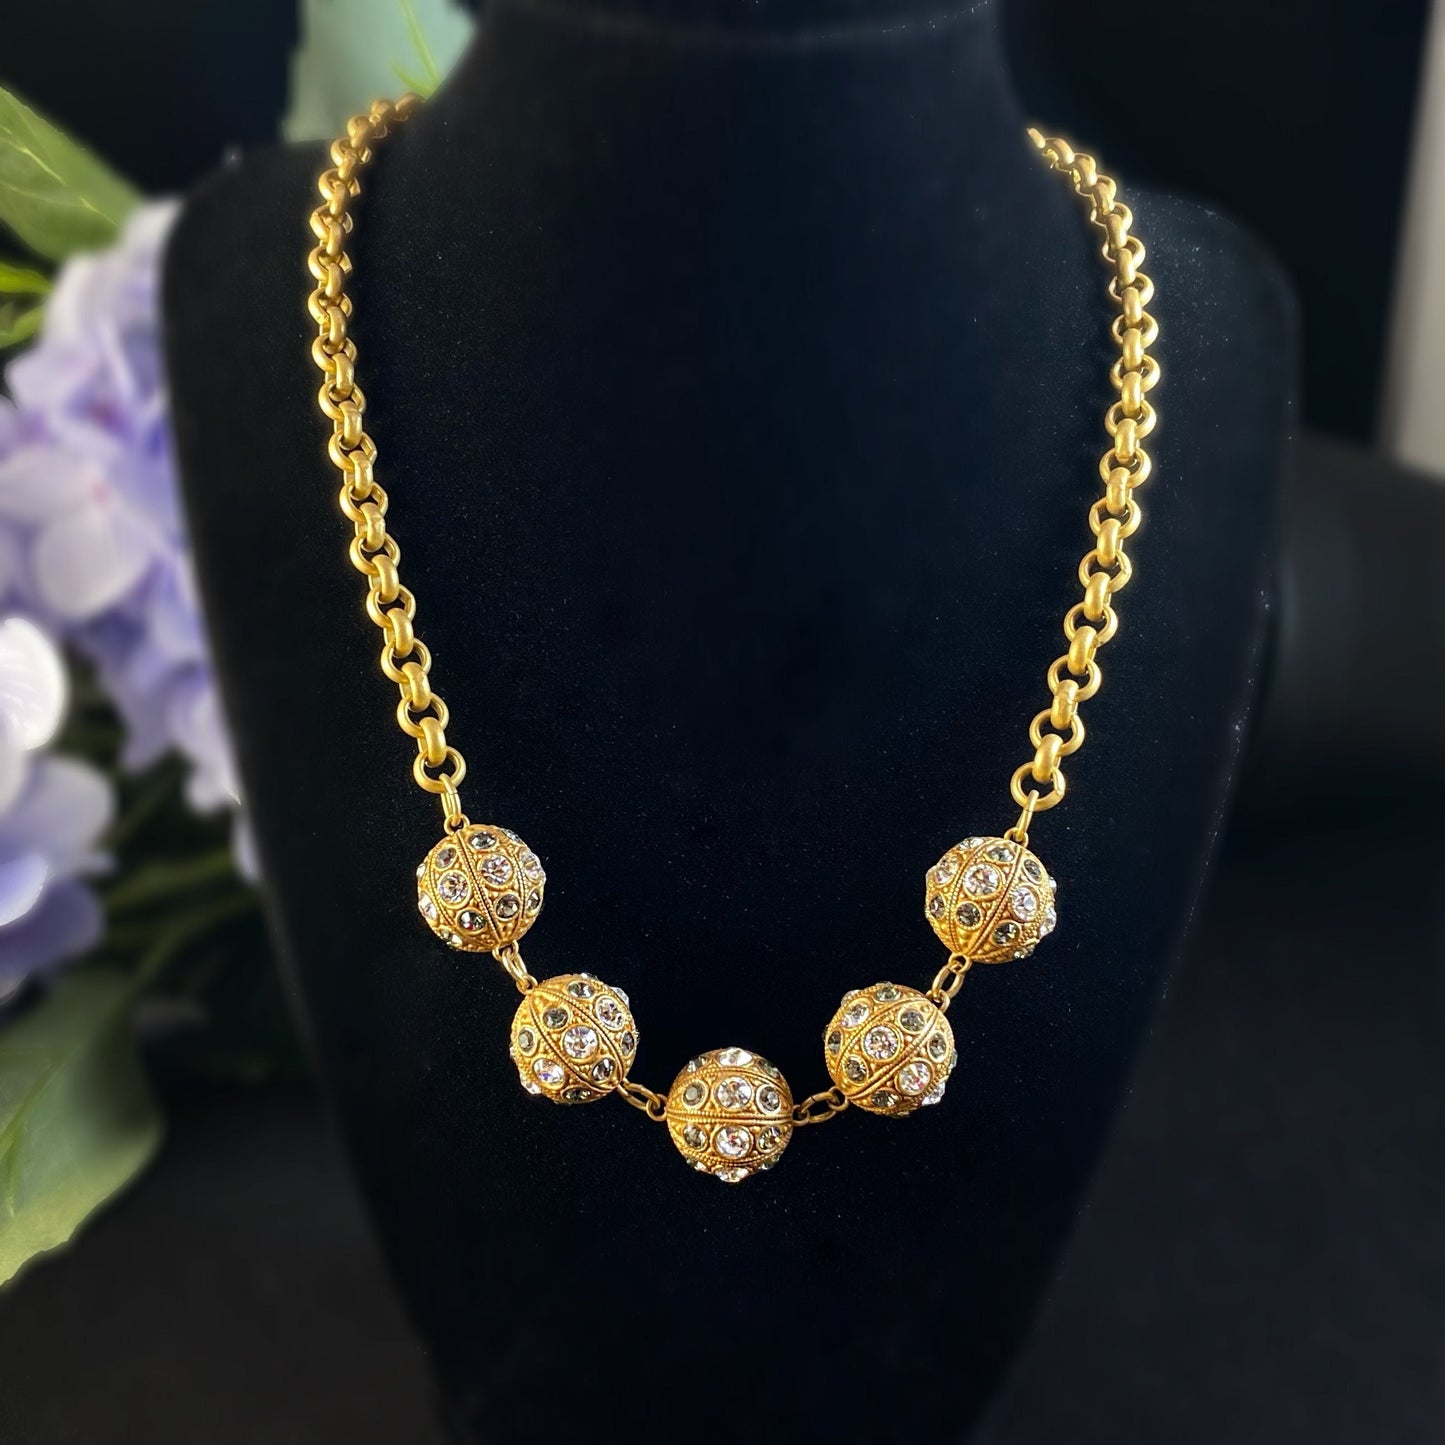 Chunky Gold Bauble Statement Necklace with Swarovski Crystals - La Vie Parisienne by Catherine Popesco